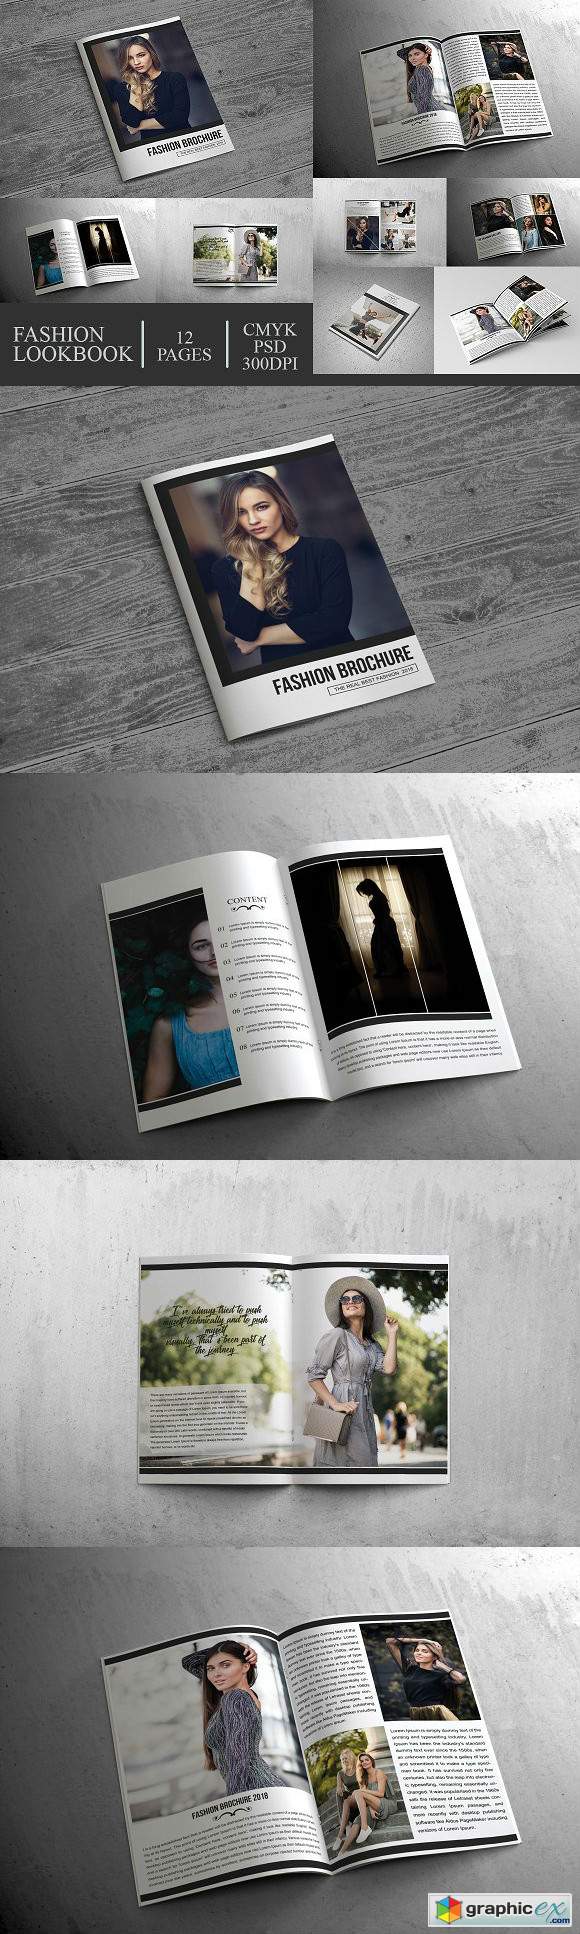 Fashion Lookbook Brochure 12 Pages